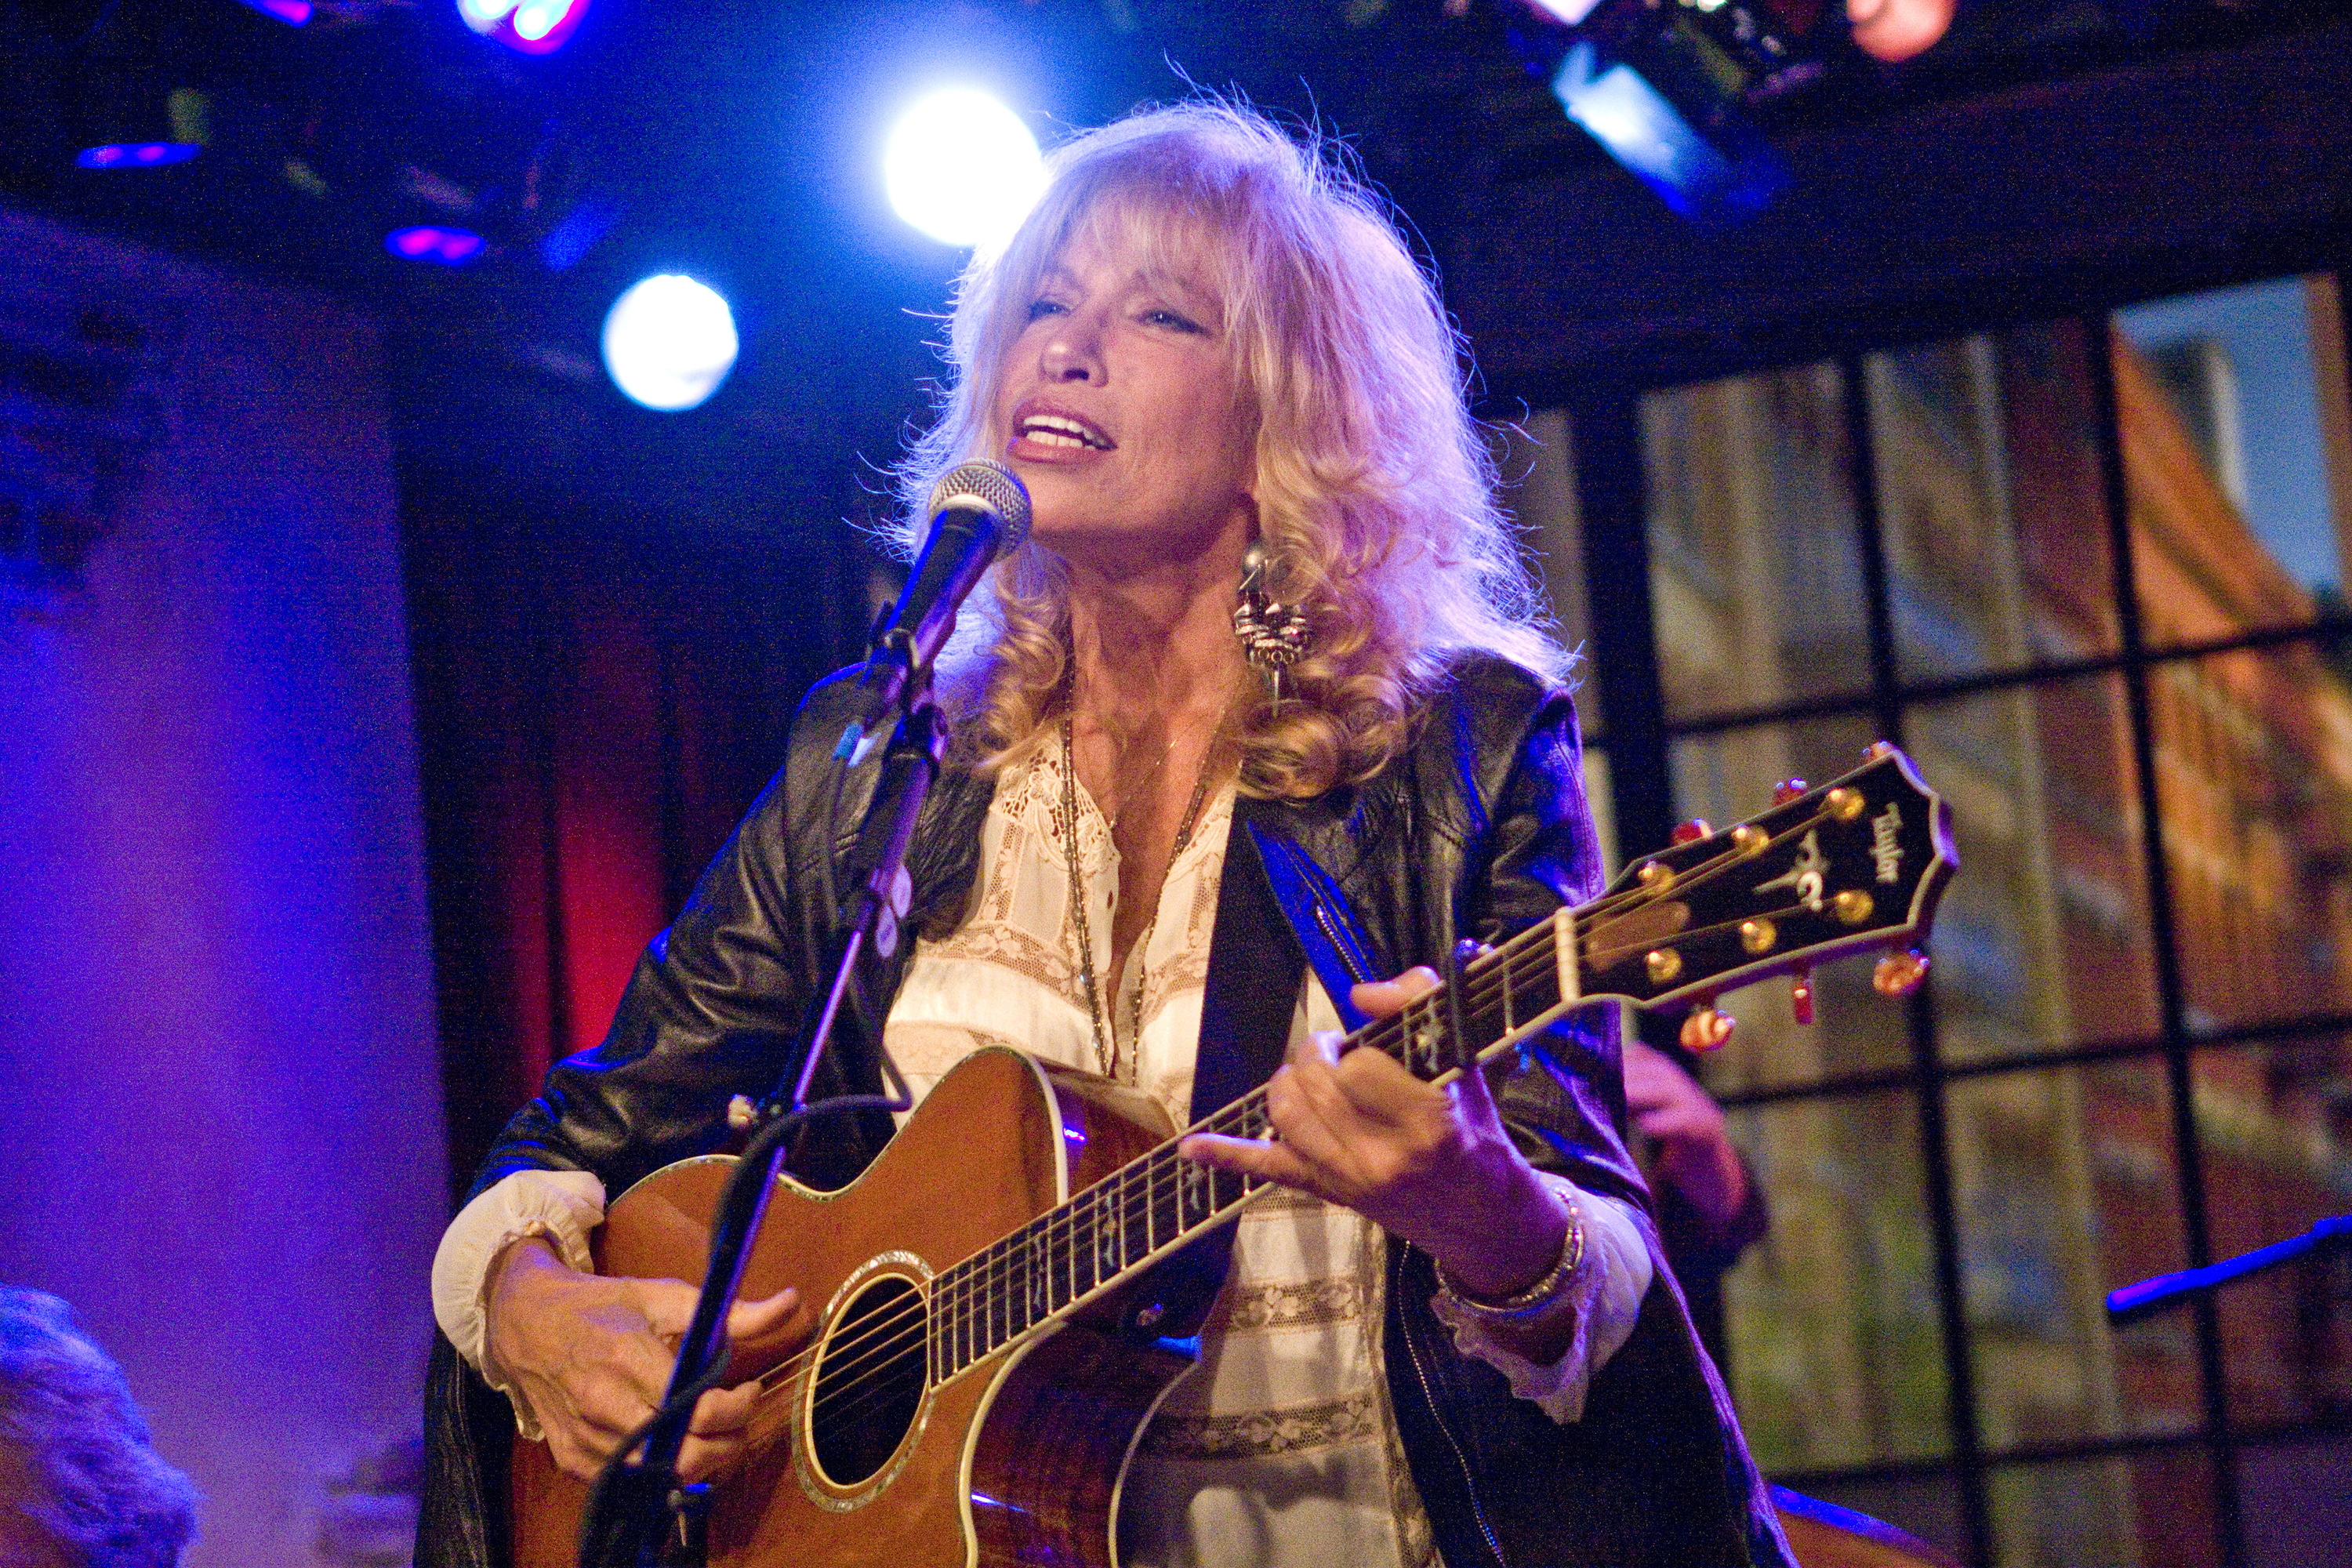 Carly Simon on "Private Sessions" in New York City on June 29, 2008. | Source: Getty Images